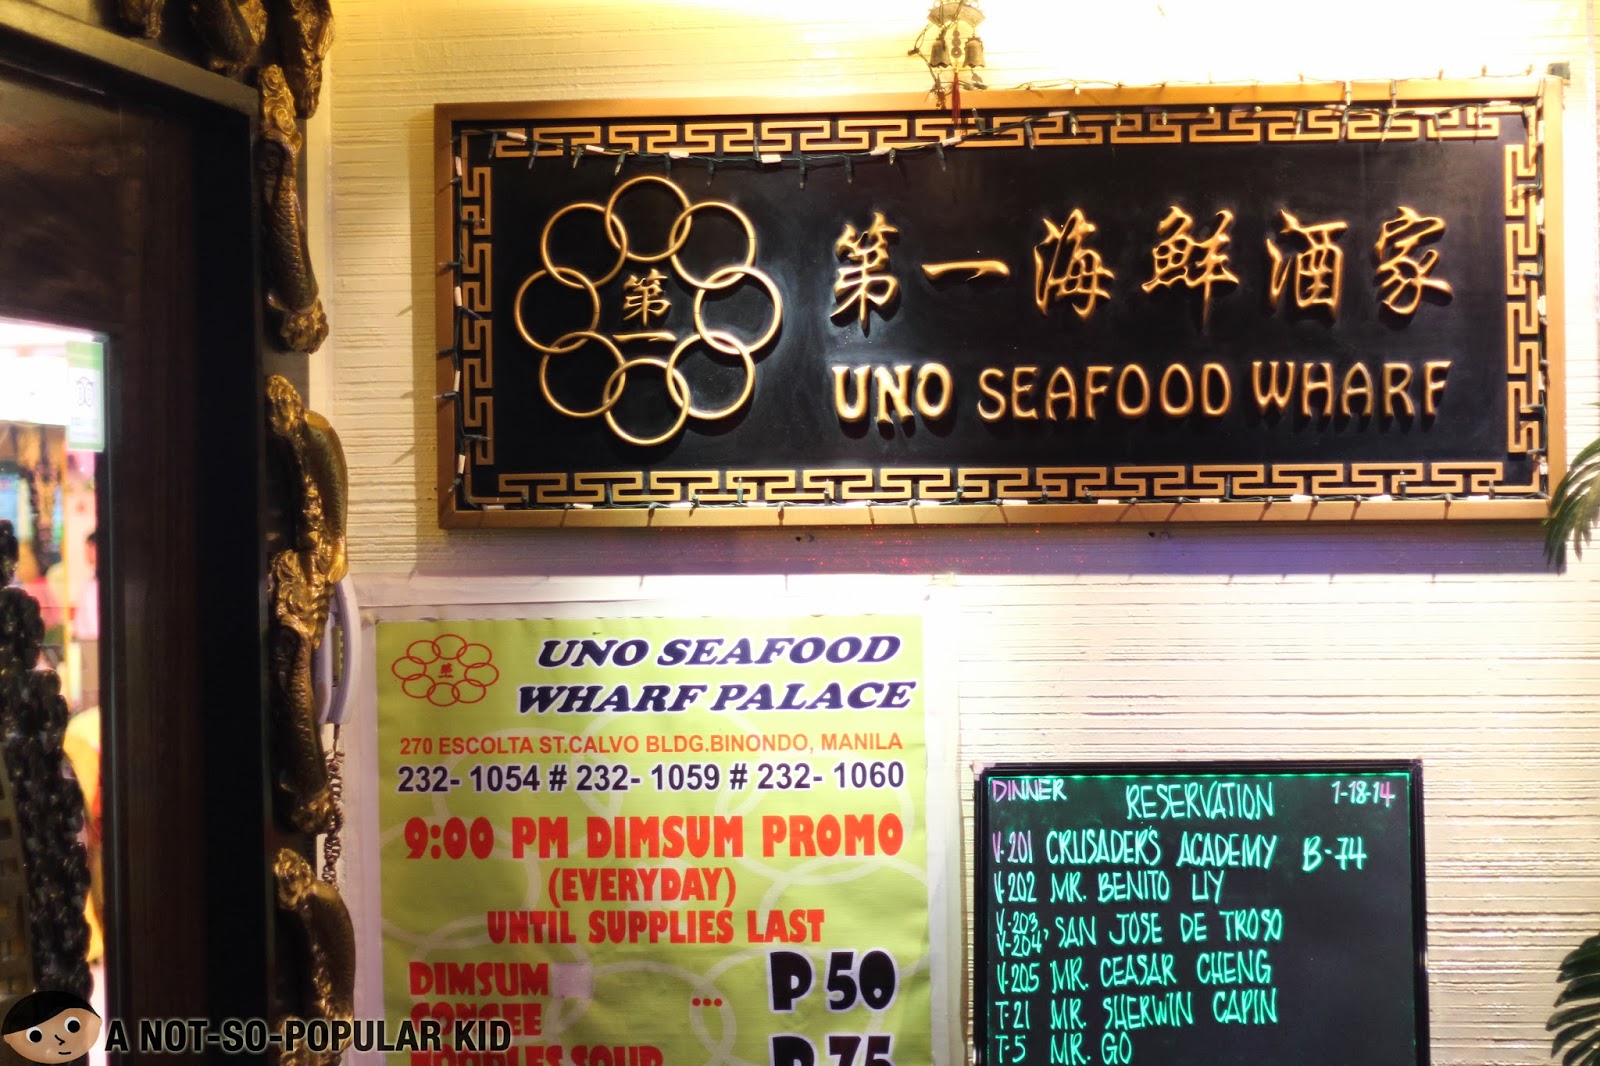 Uno Seafood Wharf Palace in Escolta